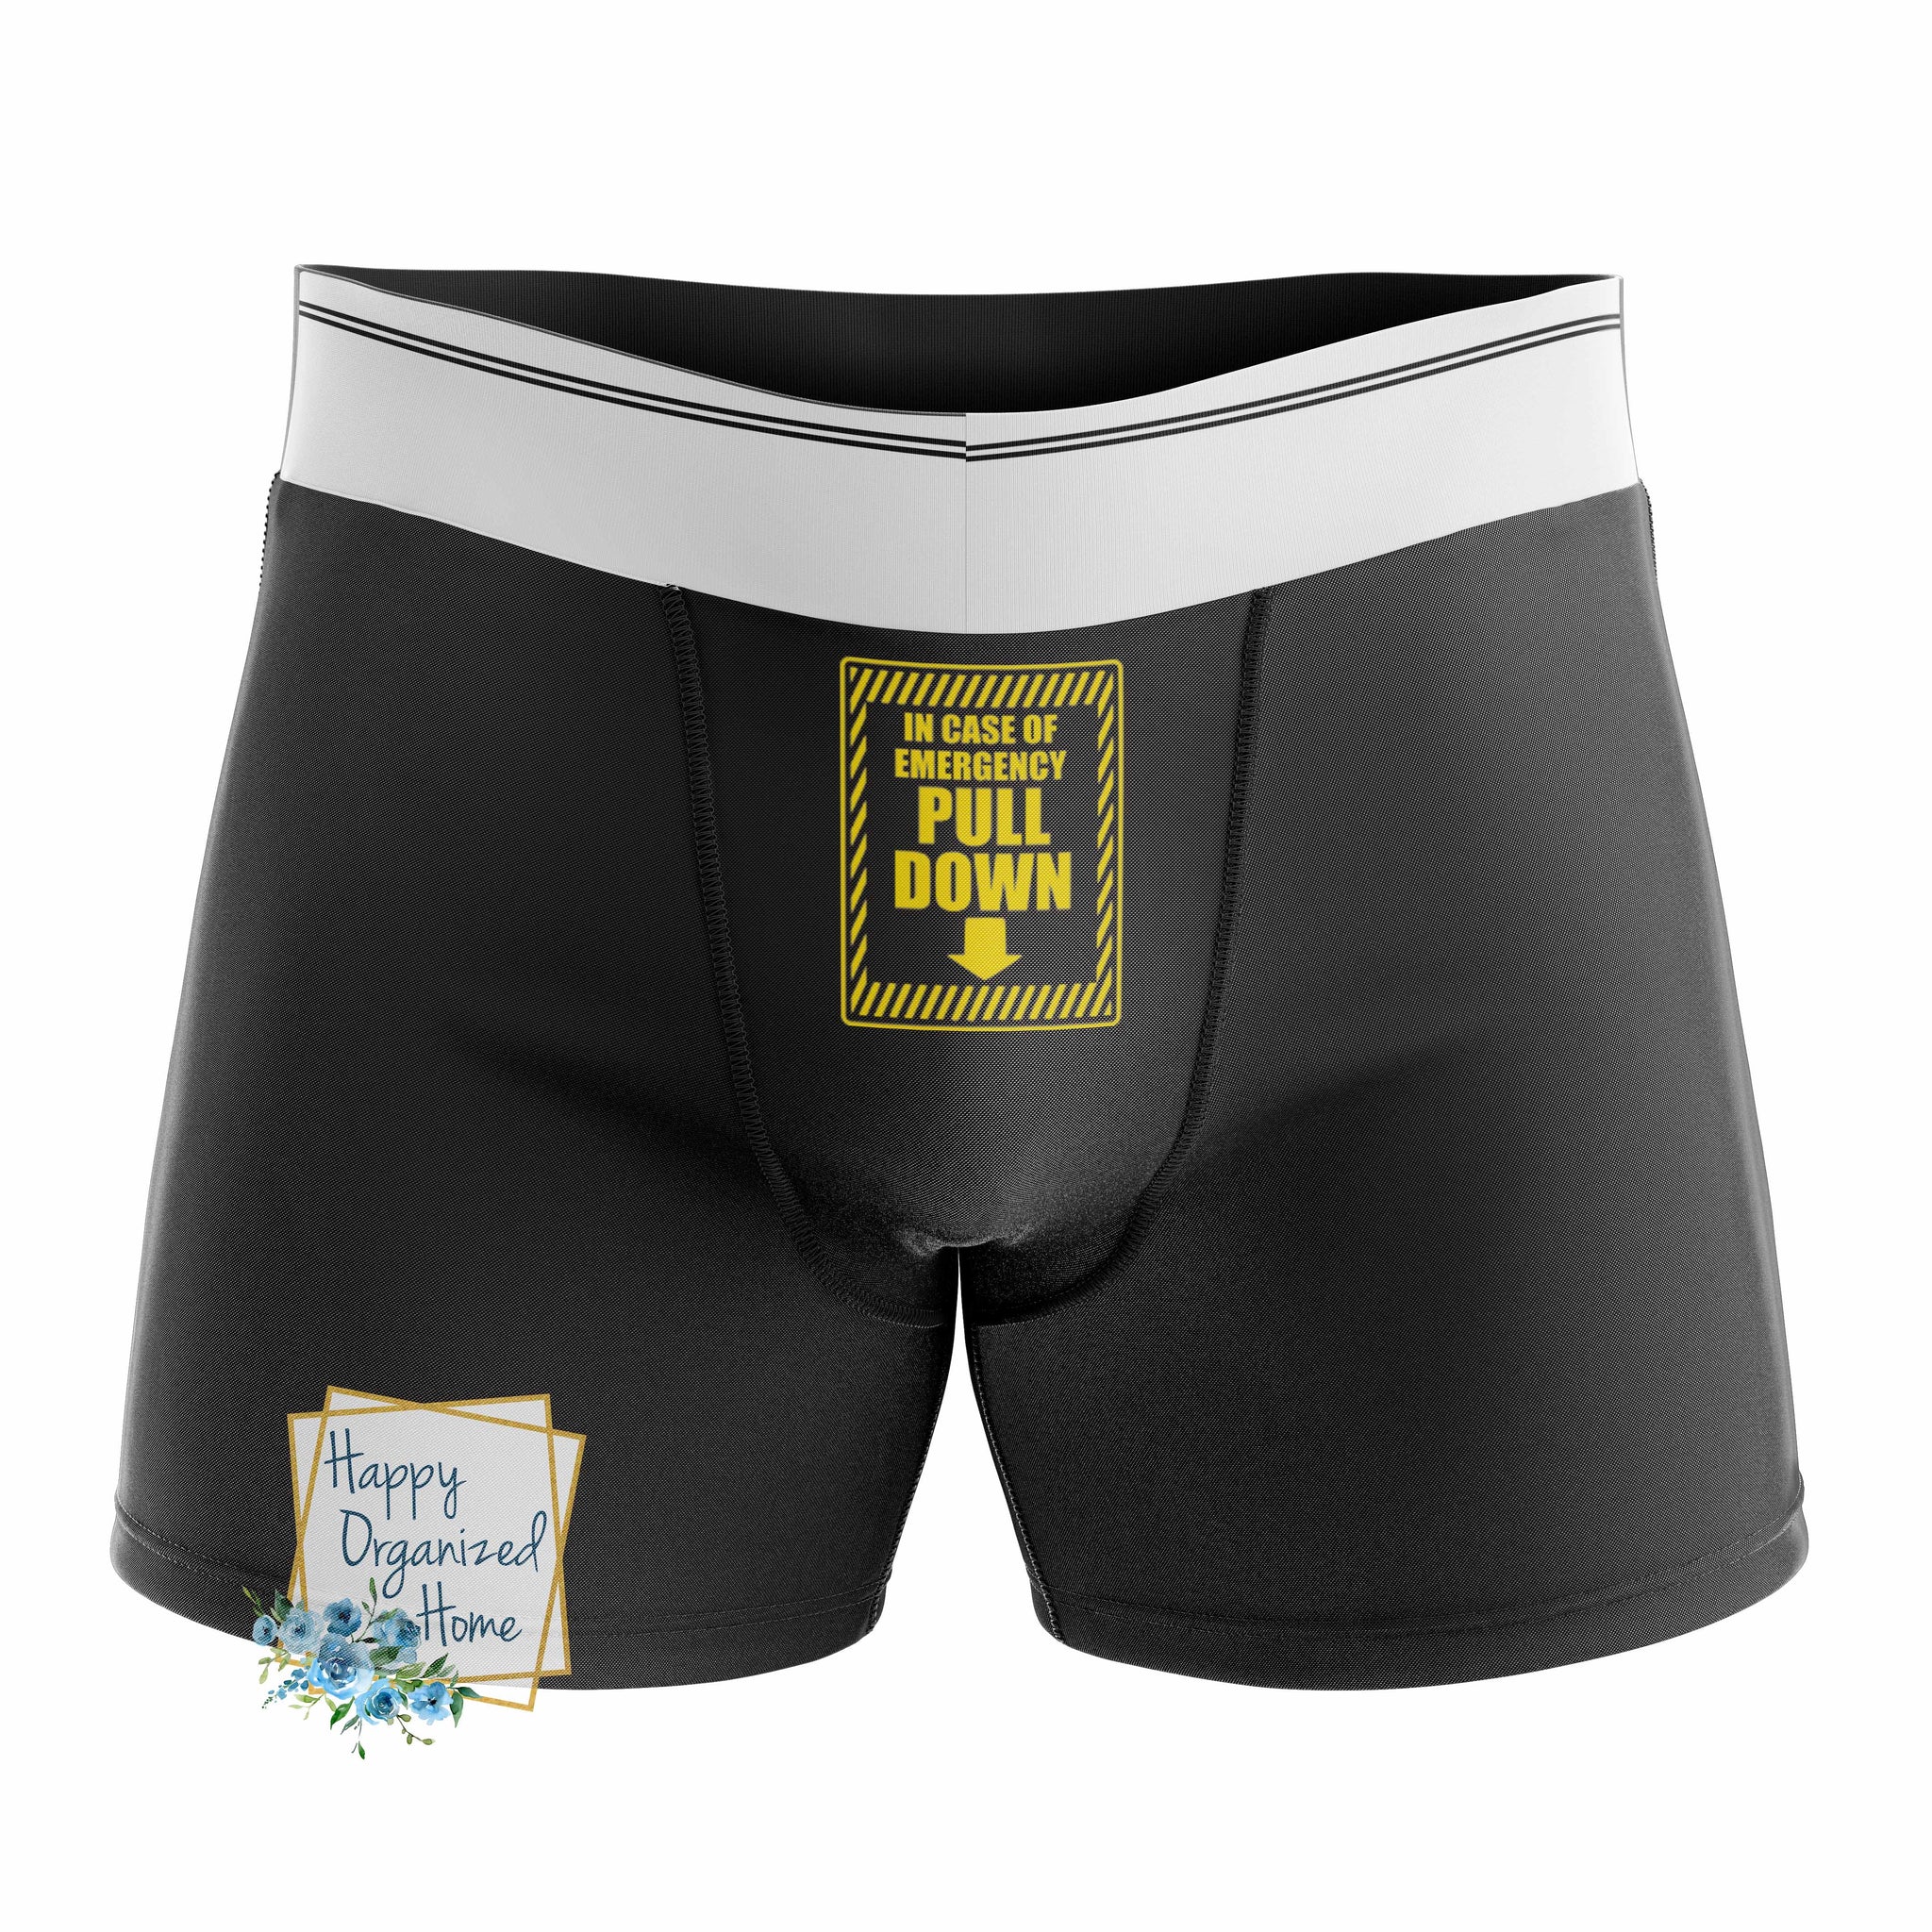 In case of Emergency PULL DOWN Men's Naughty Boxer Briefs – Happy